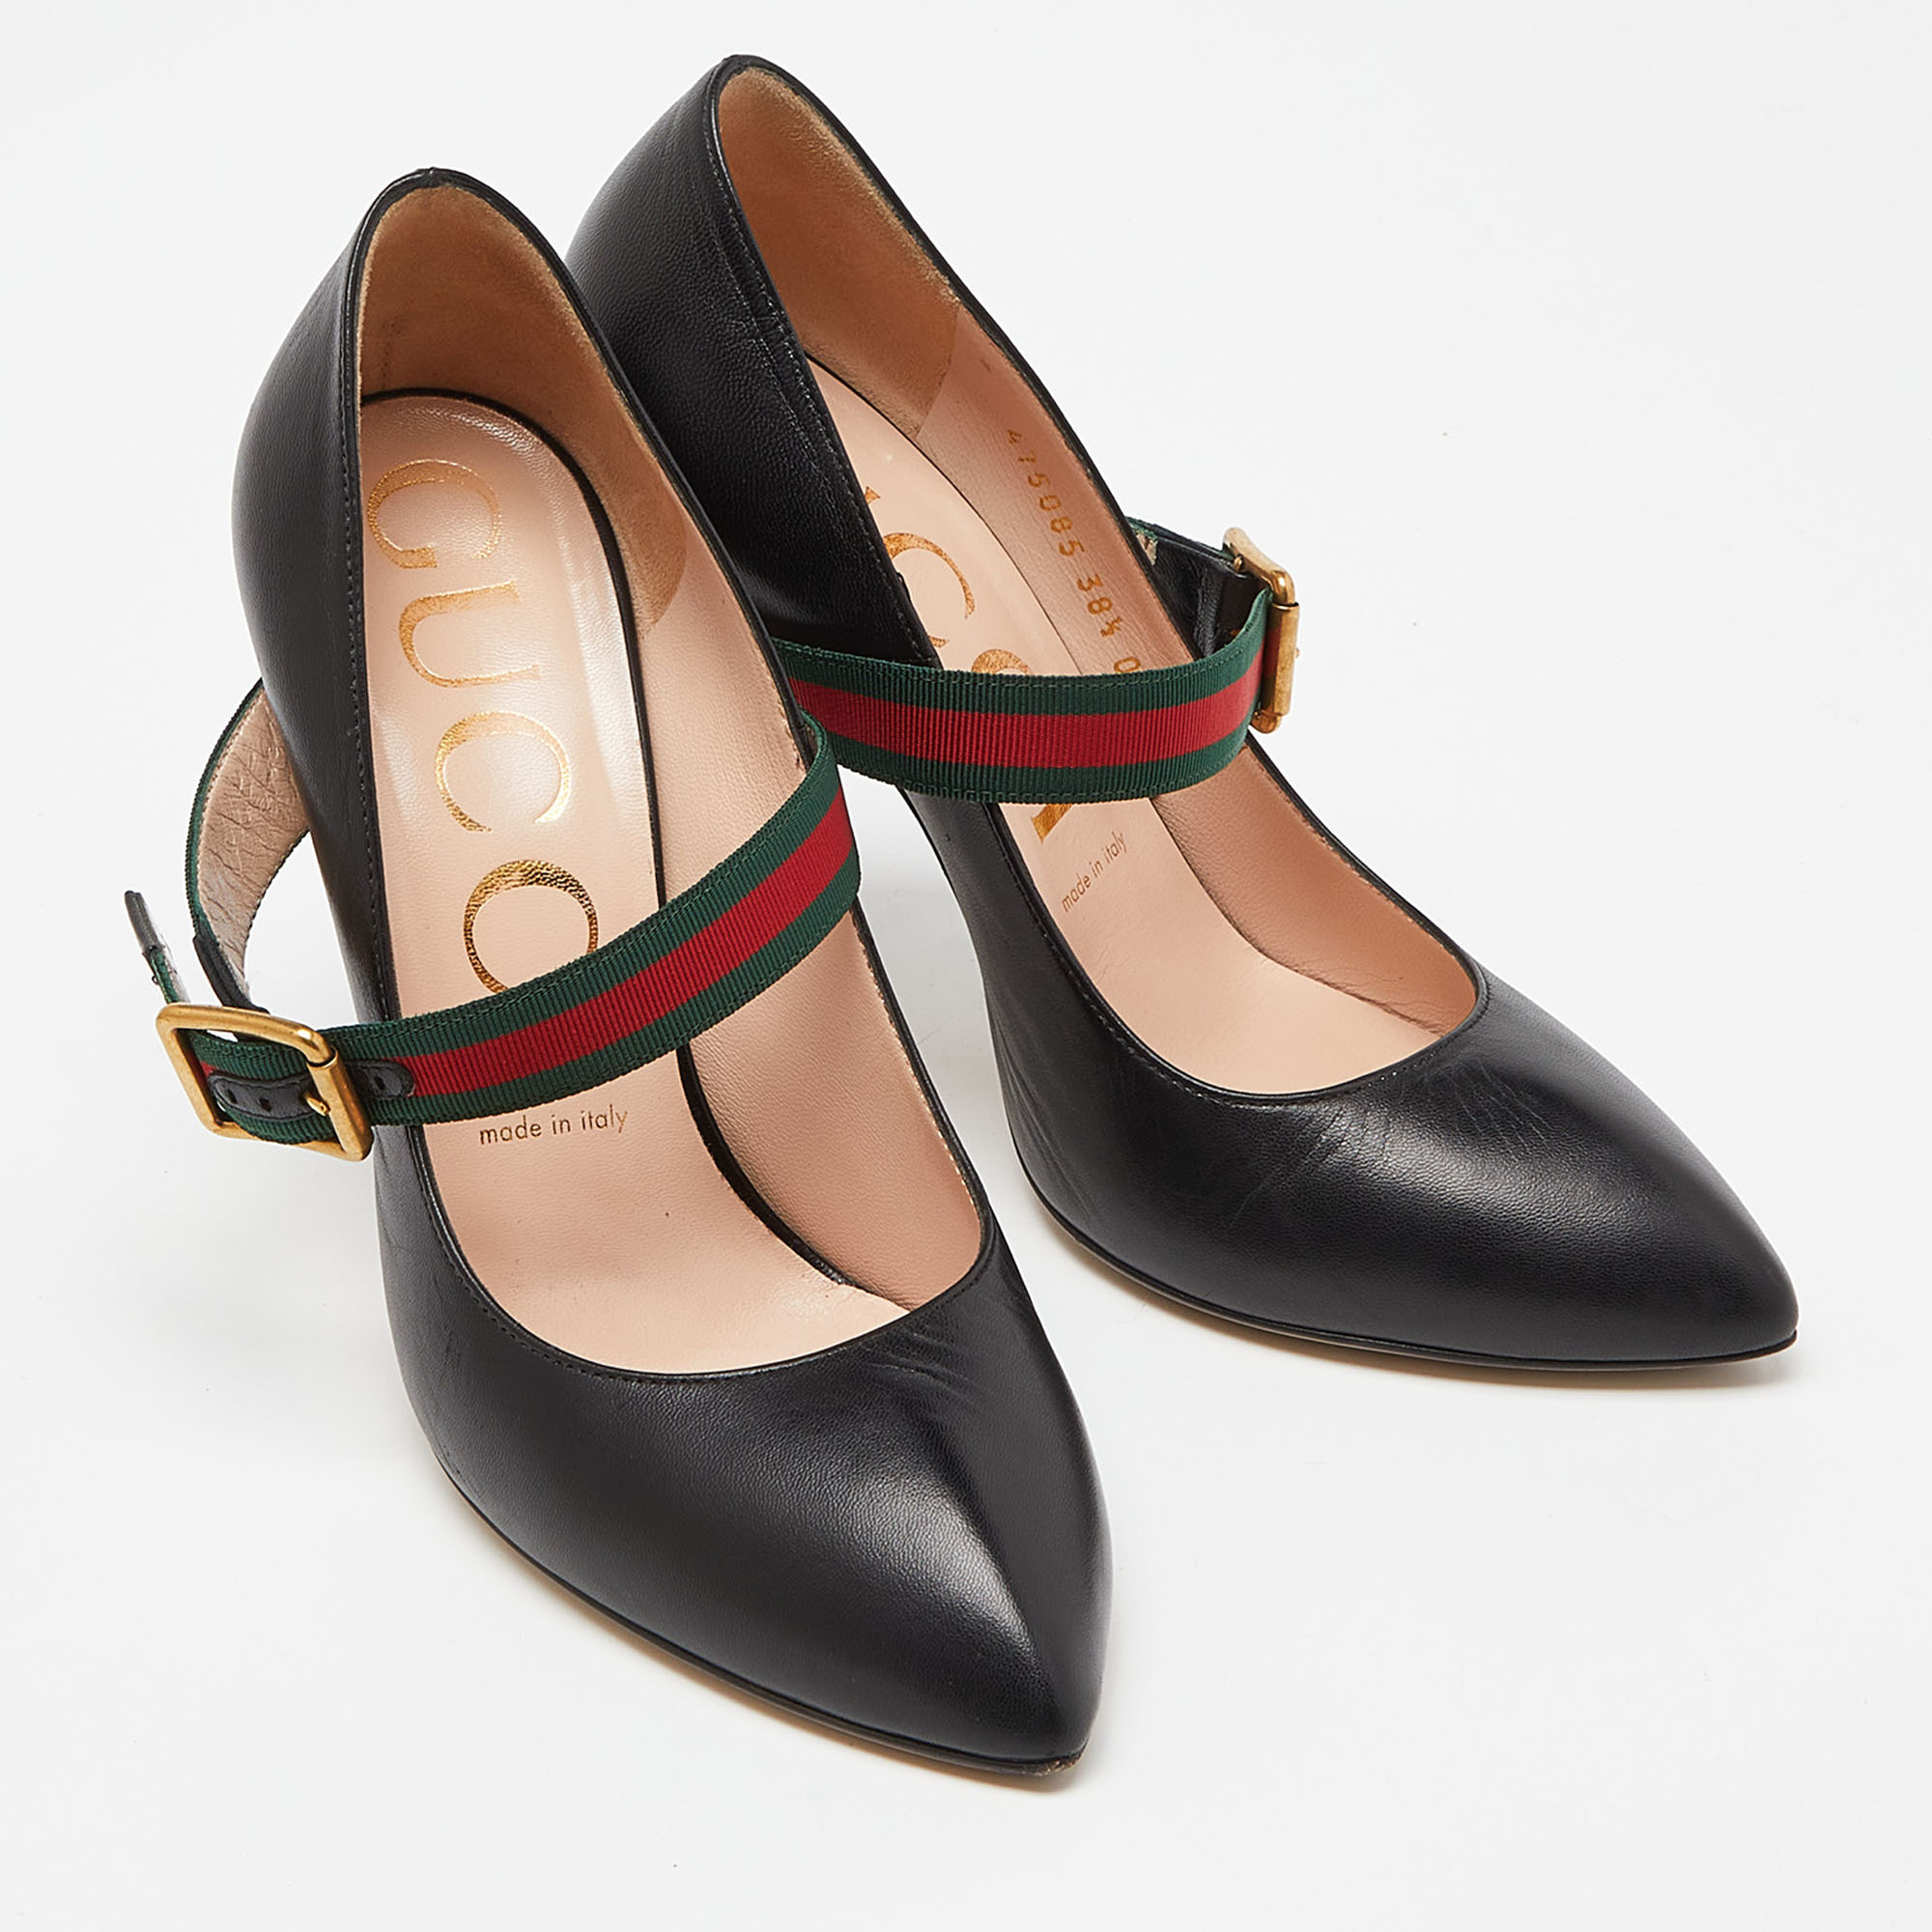 Gucci Black Leather Sylvie Mary Jane Pumps Size 38.5